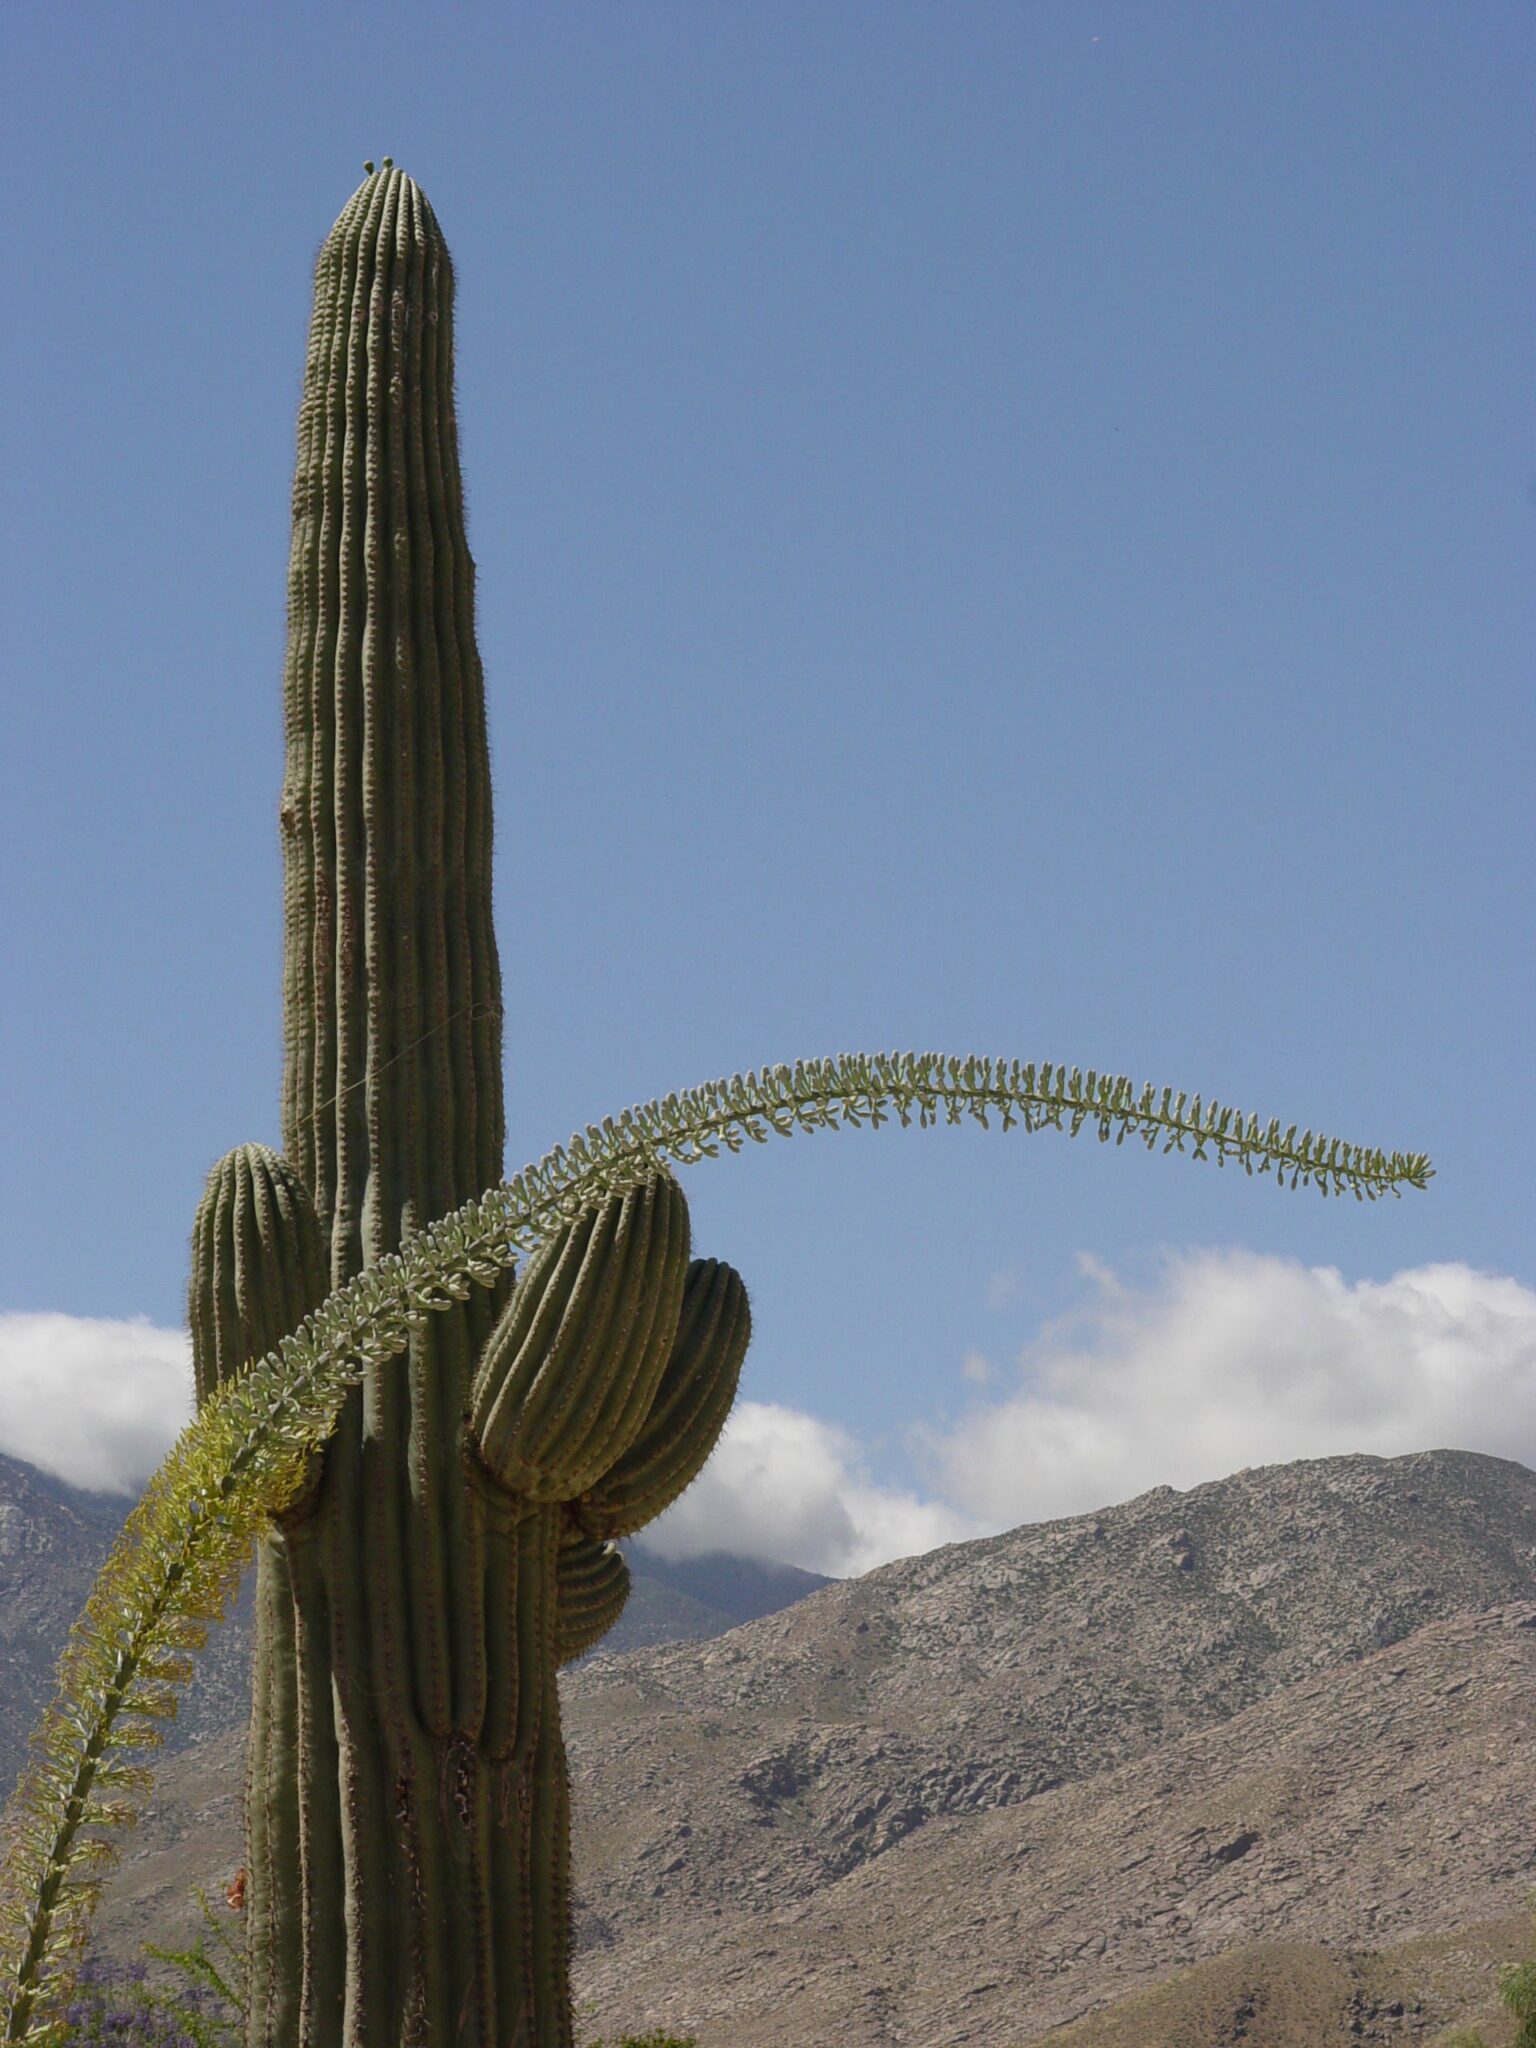 how does the saguaro cactus hold so much water